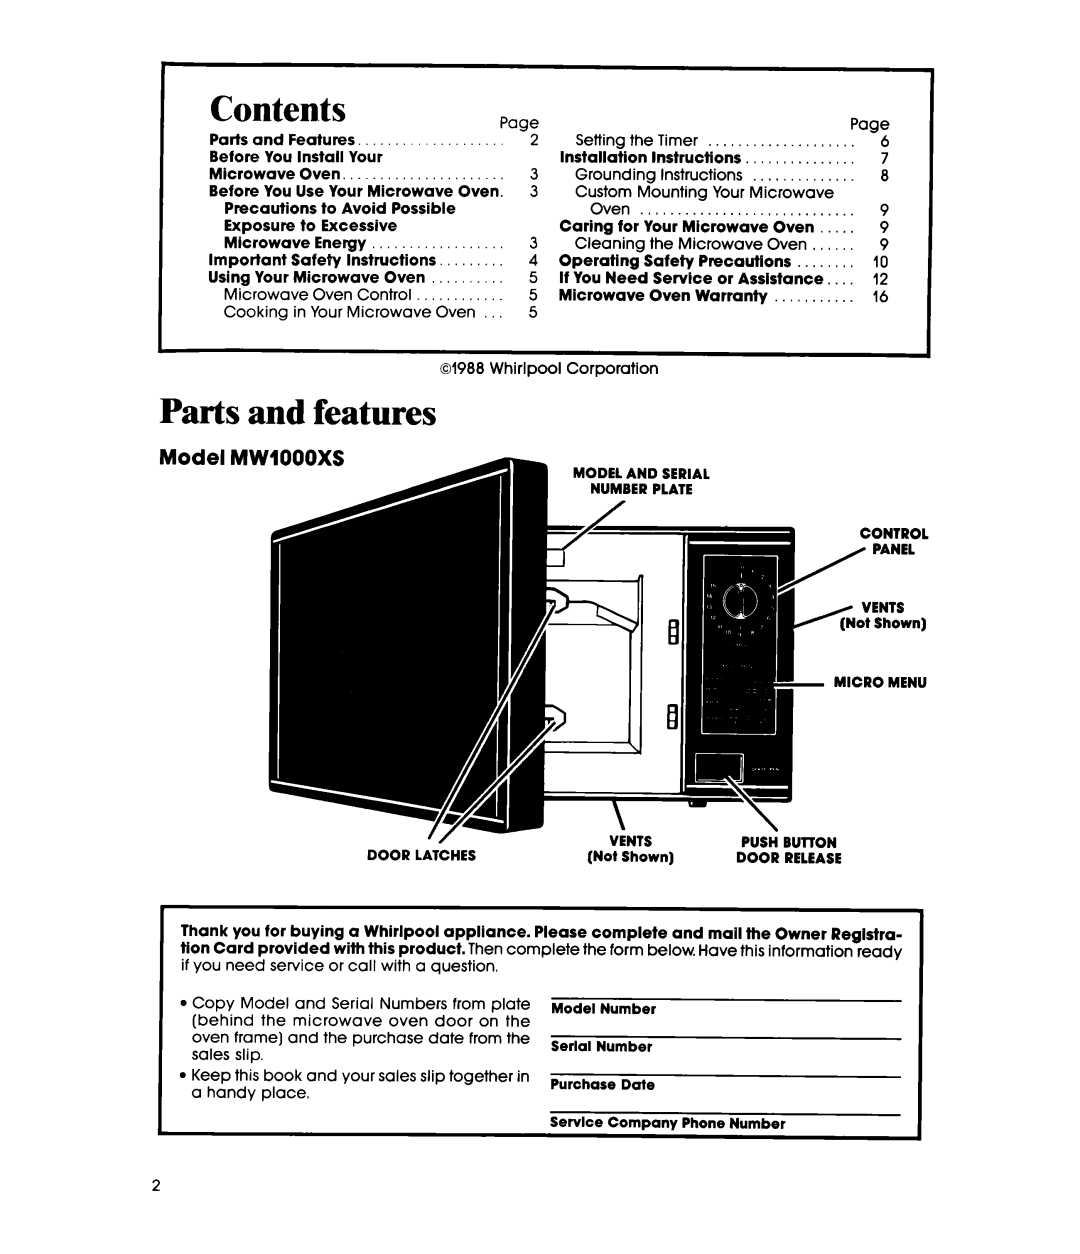 Whirlpool MWIOOOXS manual Contents, Parts and features, Mode1 